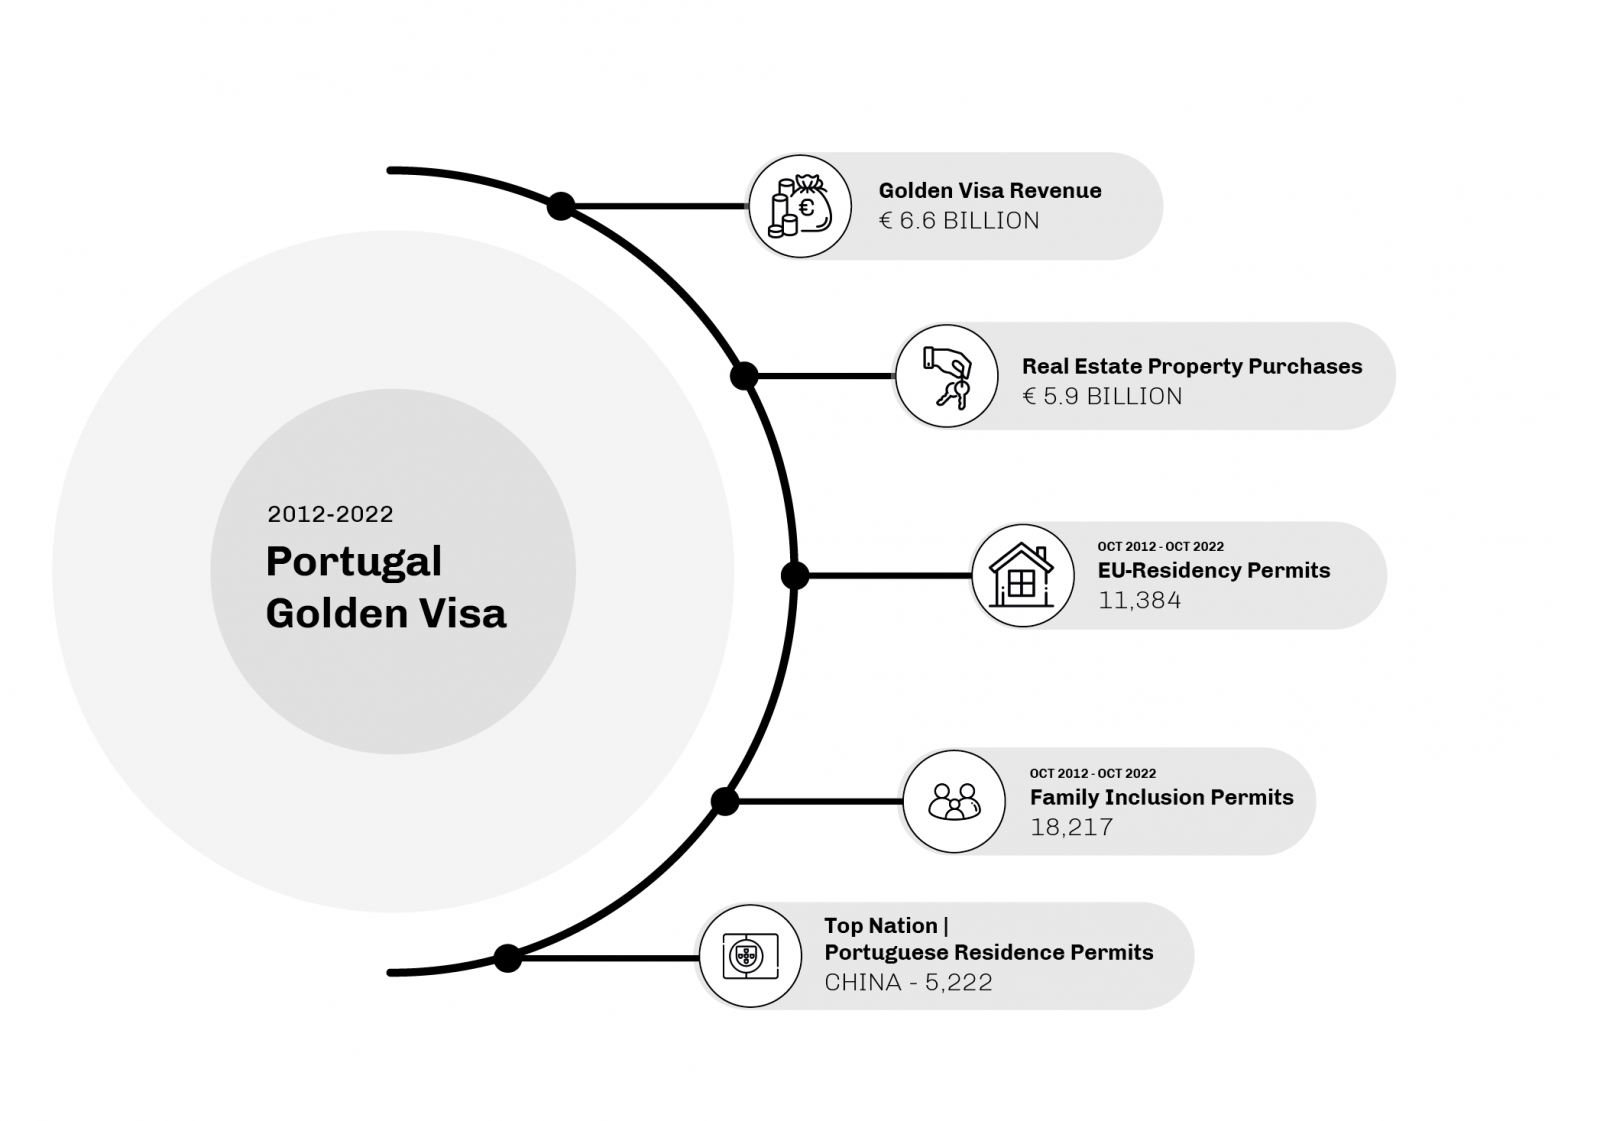 Portugal Golden Visa over 10 years, from 2012 to 2022, statistics and evolution.